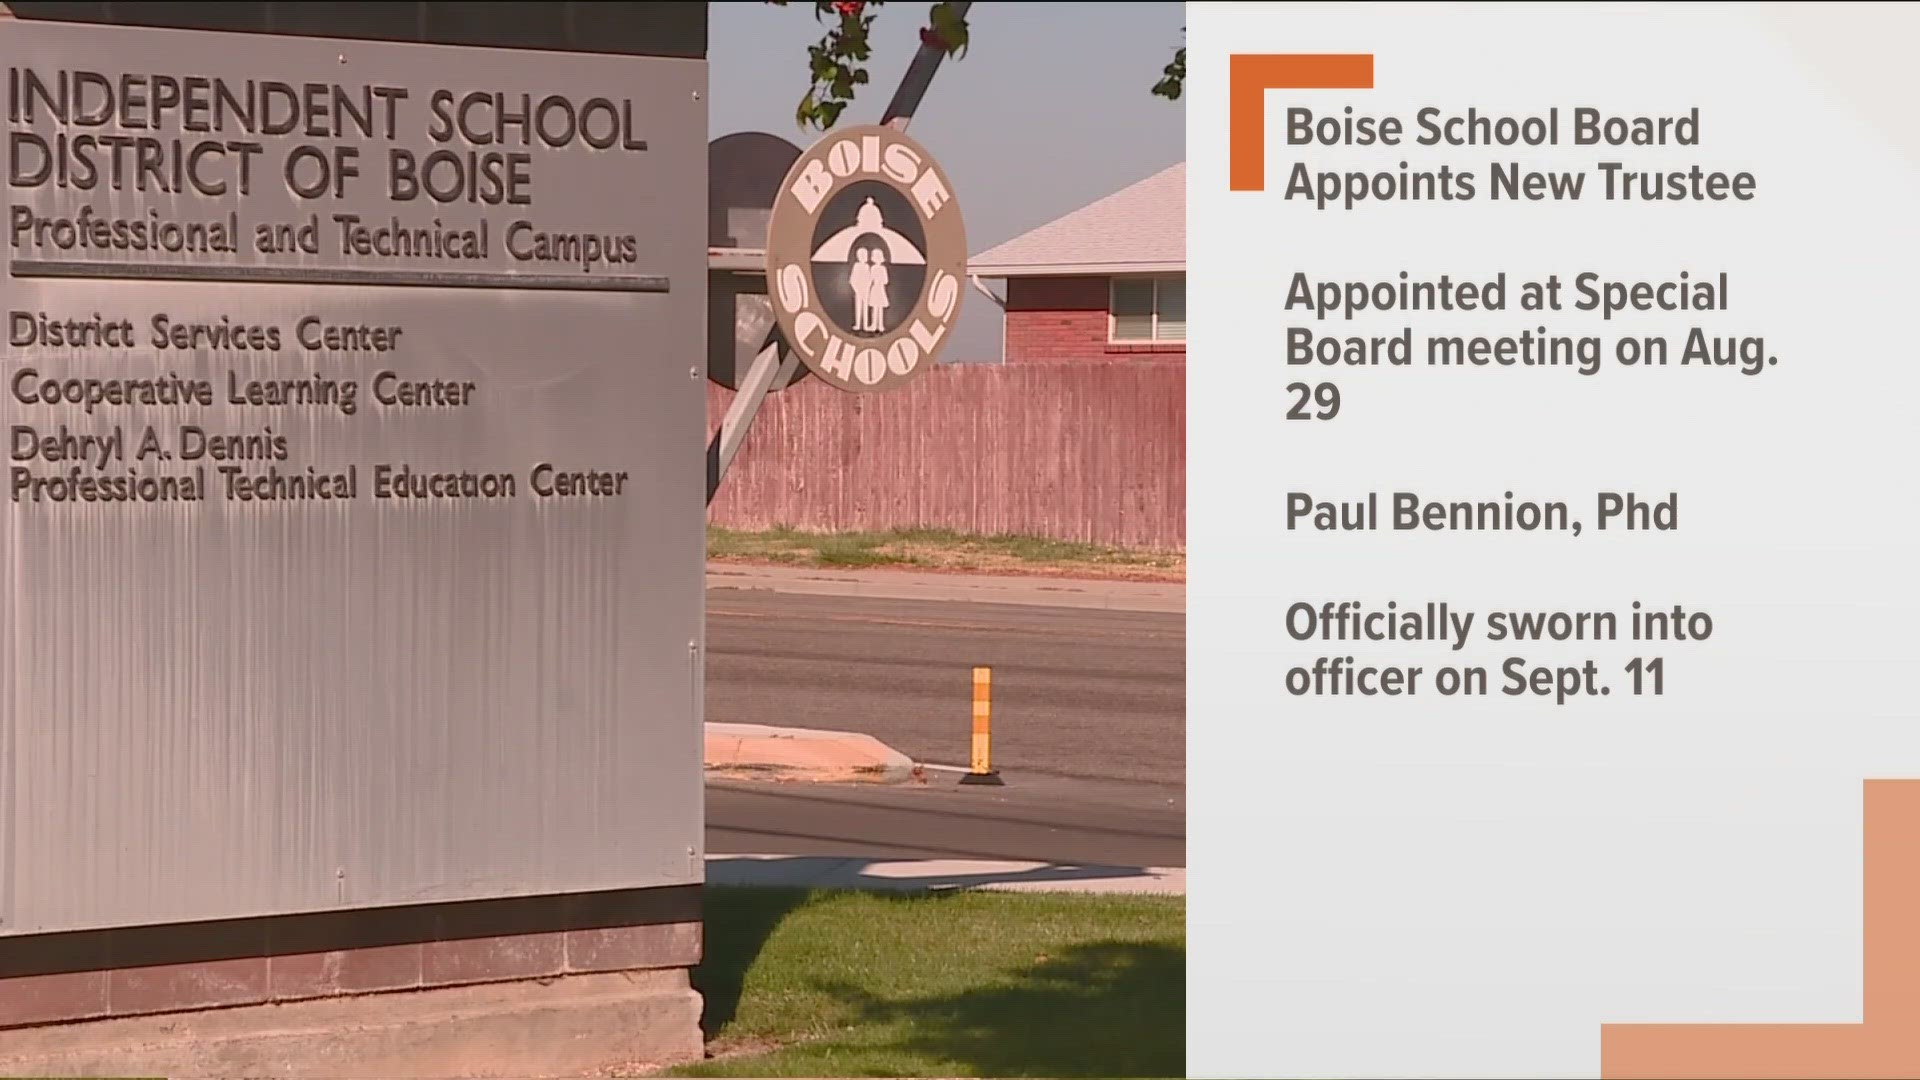 In a special meeting on Aug. 29, a new Boise School Board trustee was selected.